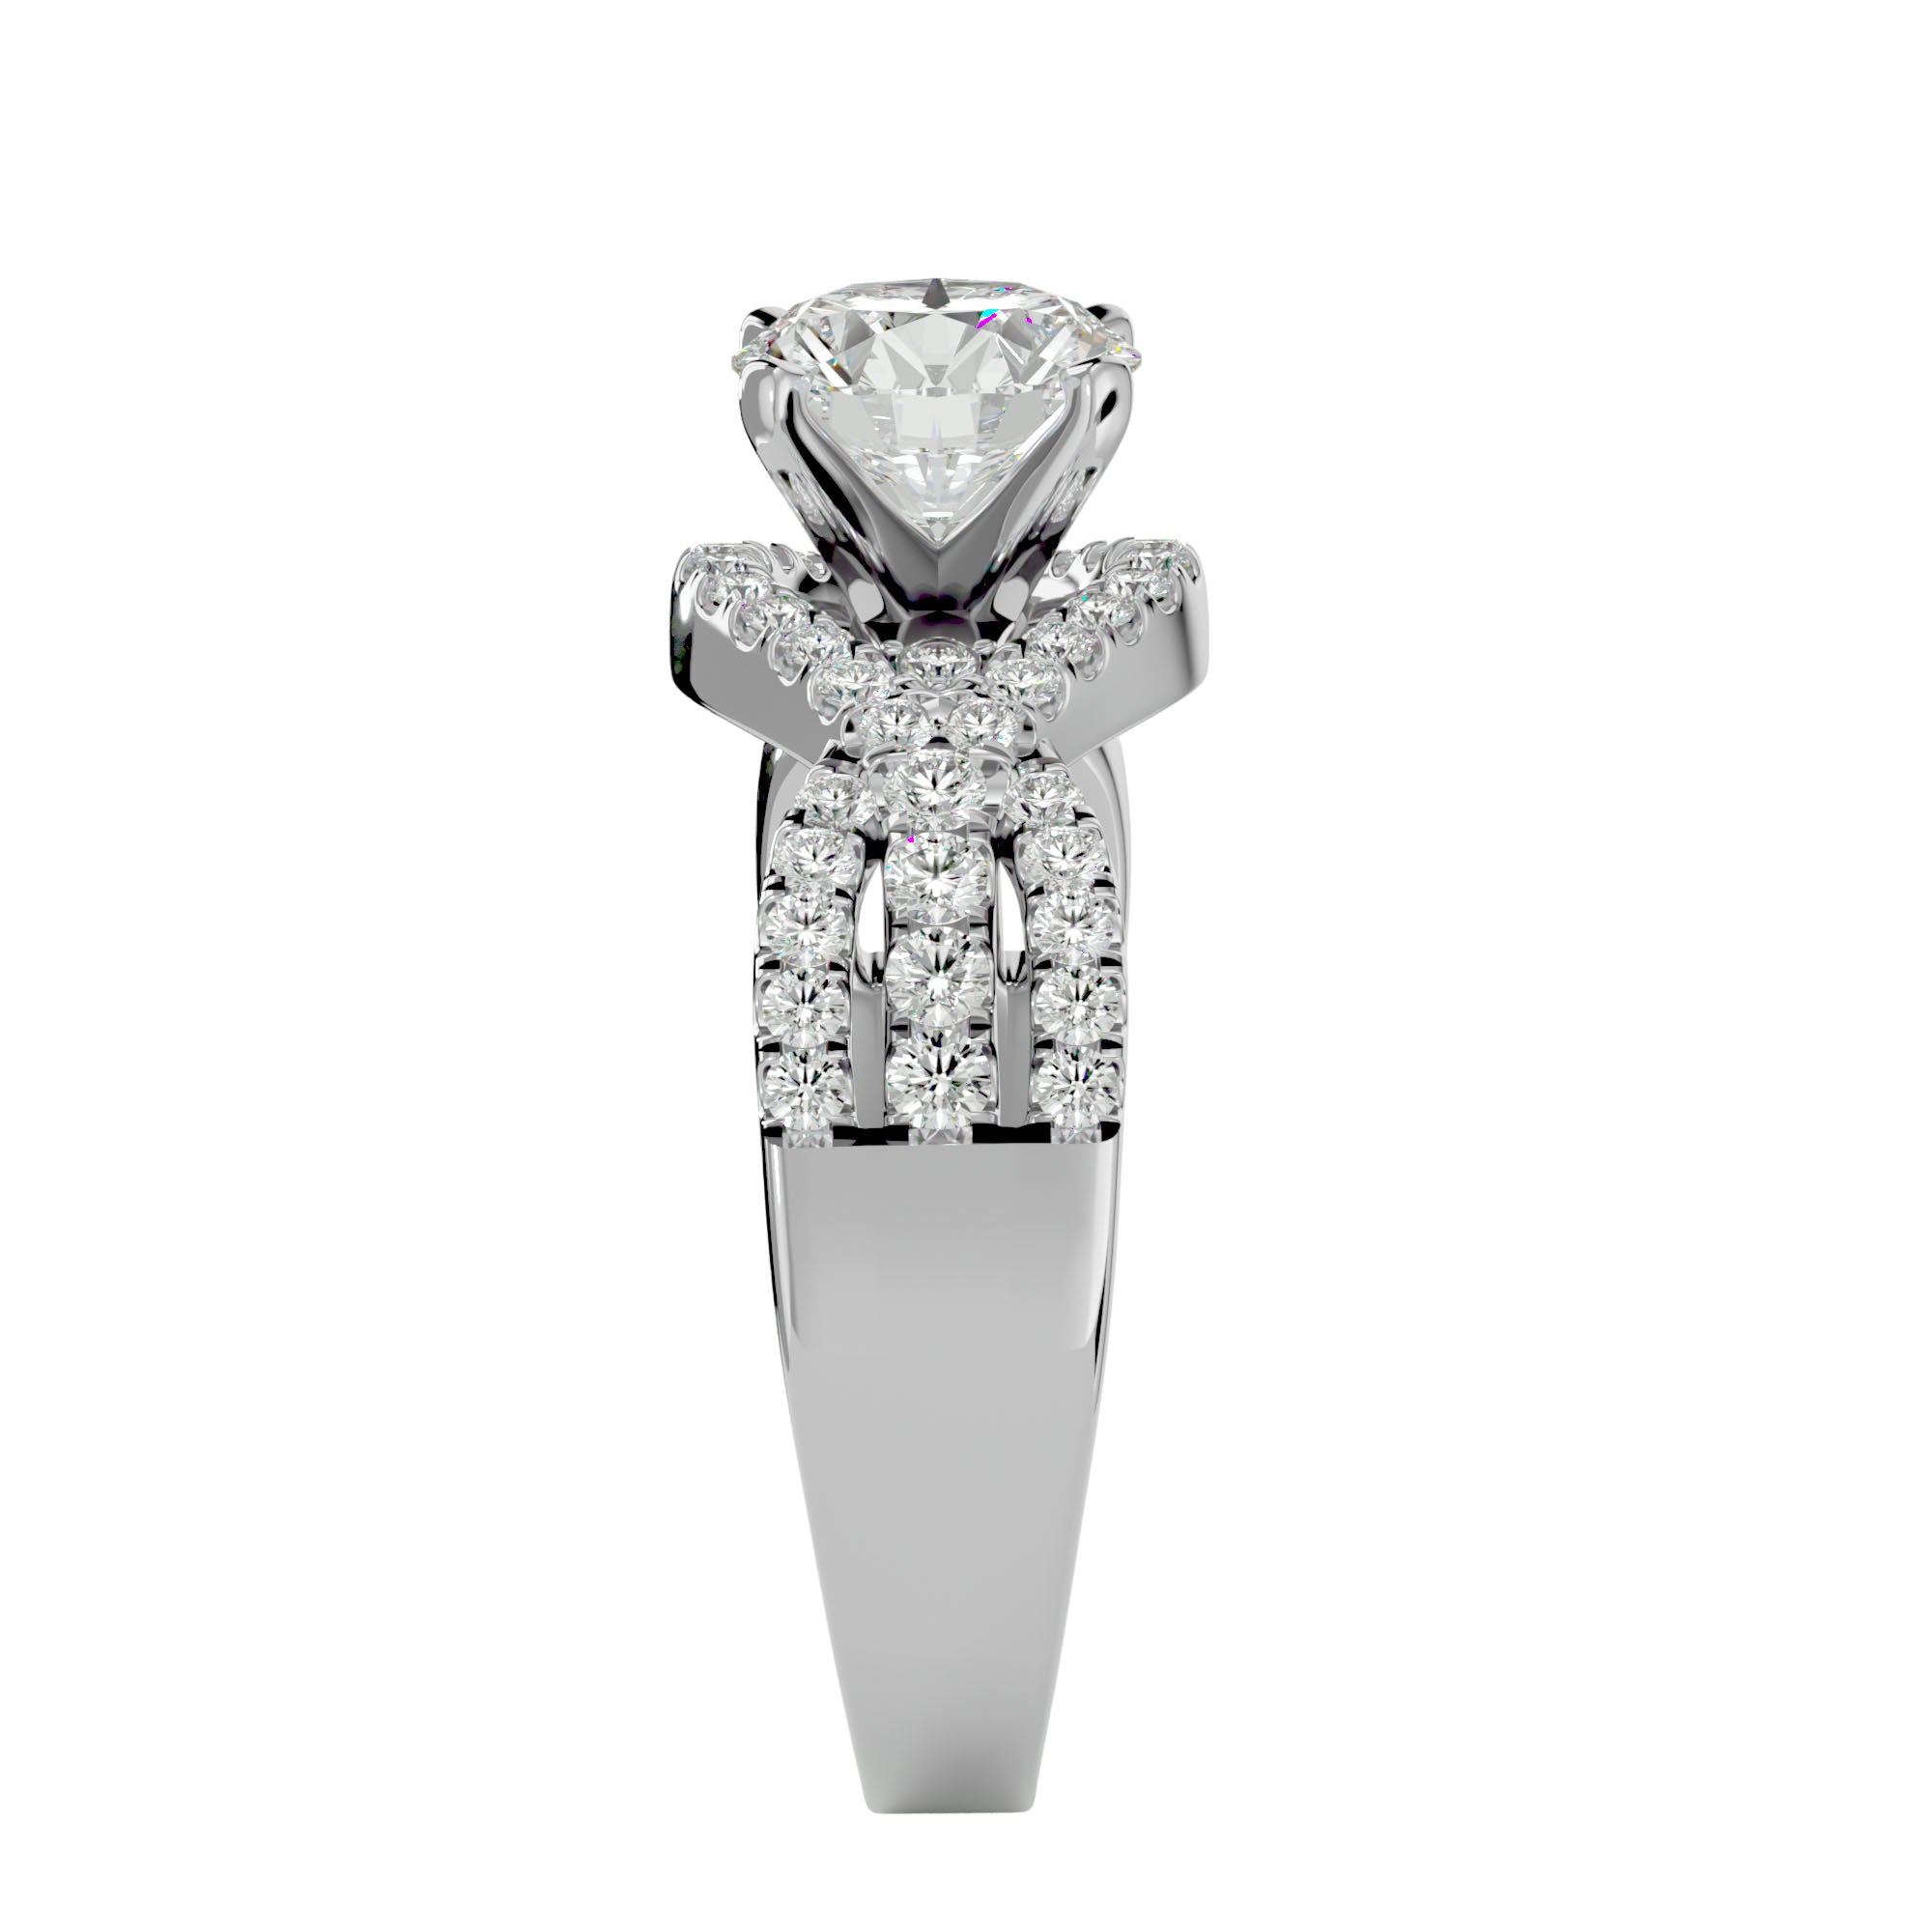 HOH Felicity Diamond Solitaire Ring